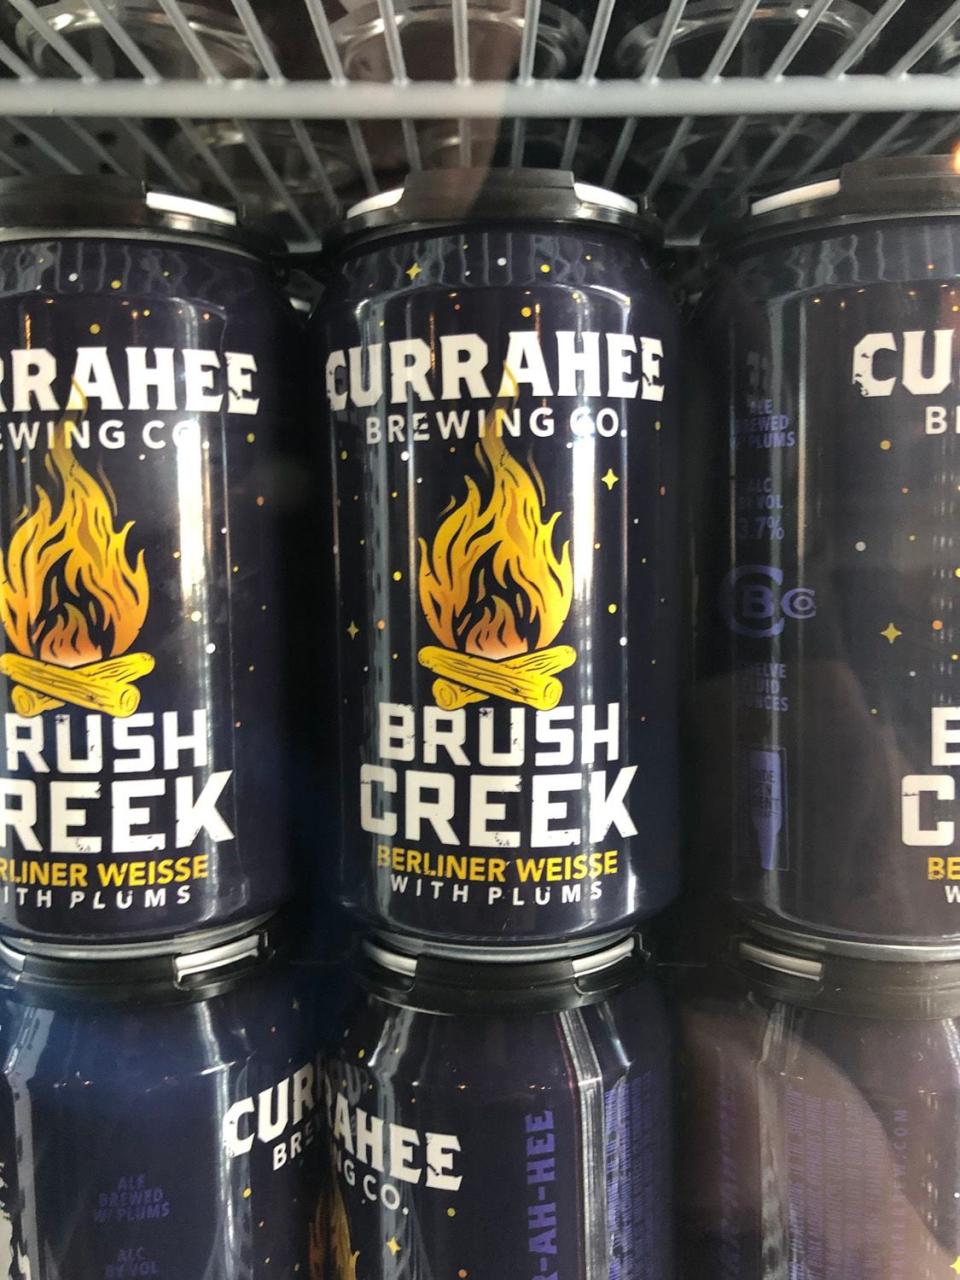 Here are some more photos from Currahee Brewing in Rabun County.